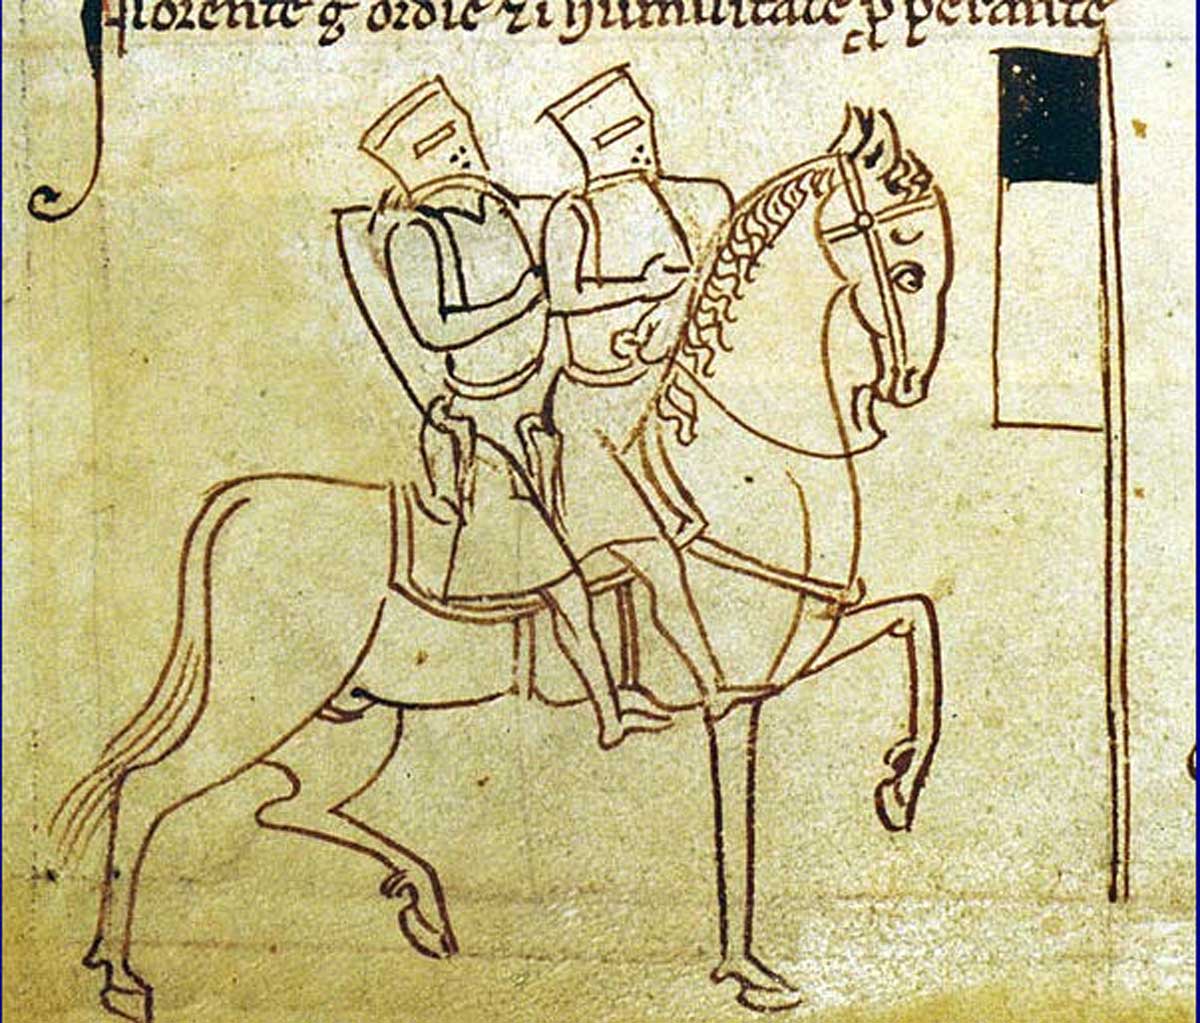  Drawing of two knights on a horse, the emblem of the Knights Templar, from the Chronica Majora of Matthew Paris.